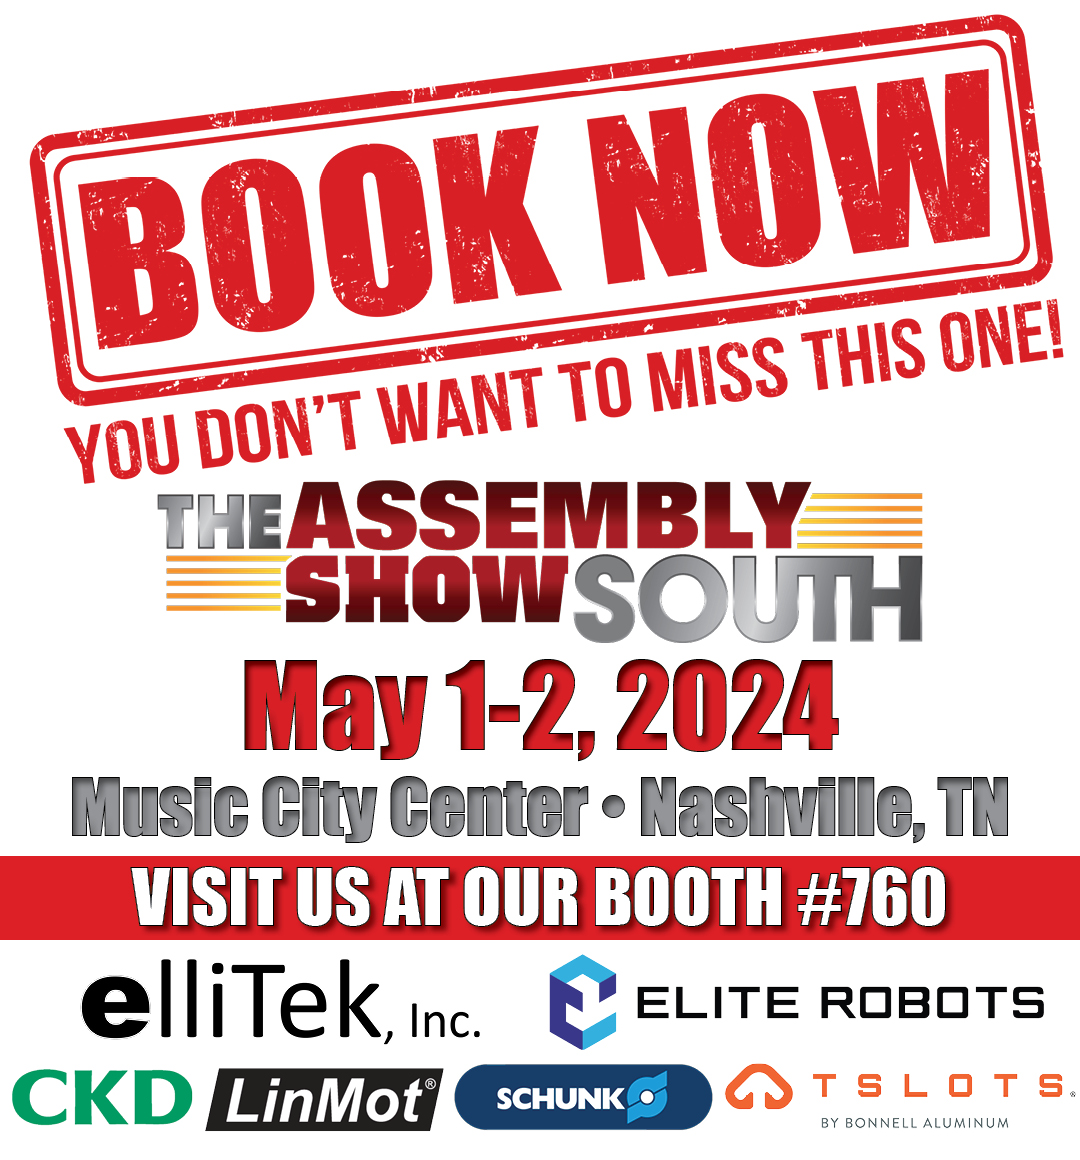 ✨FREE Registration✨ The #ASSEMBLYShowSouth is back at the Music City Center in Nashville, TN on May 1-2!🎶 No foolin’ – Registration is FREE when you use code: ELLIVIP ⏳Secure your spot now: na.eventscloud.com/ereg/newreg.ph… Visit @elliTek_Inc's Booth 760! #FreeRegistration